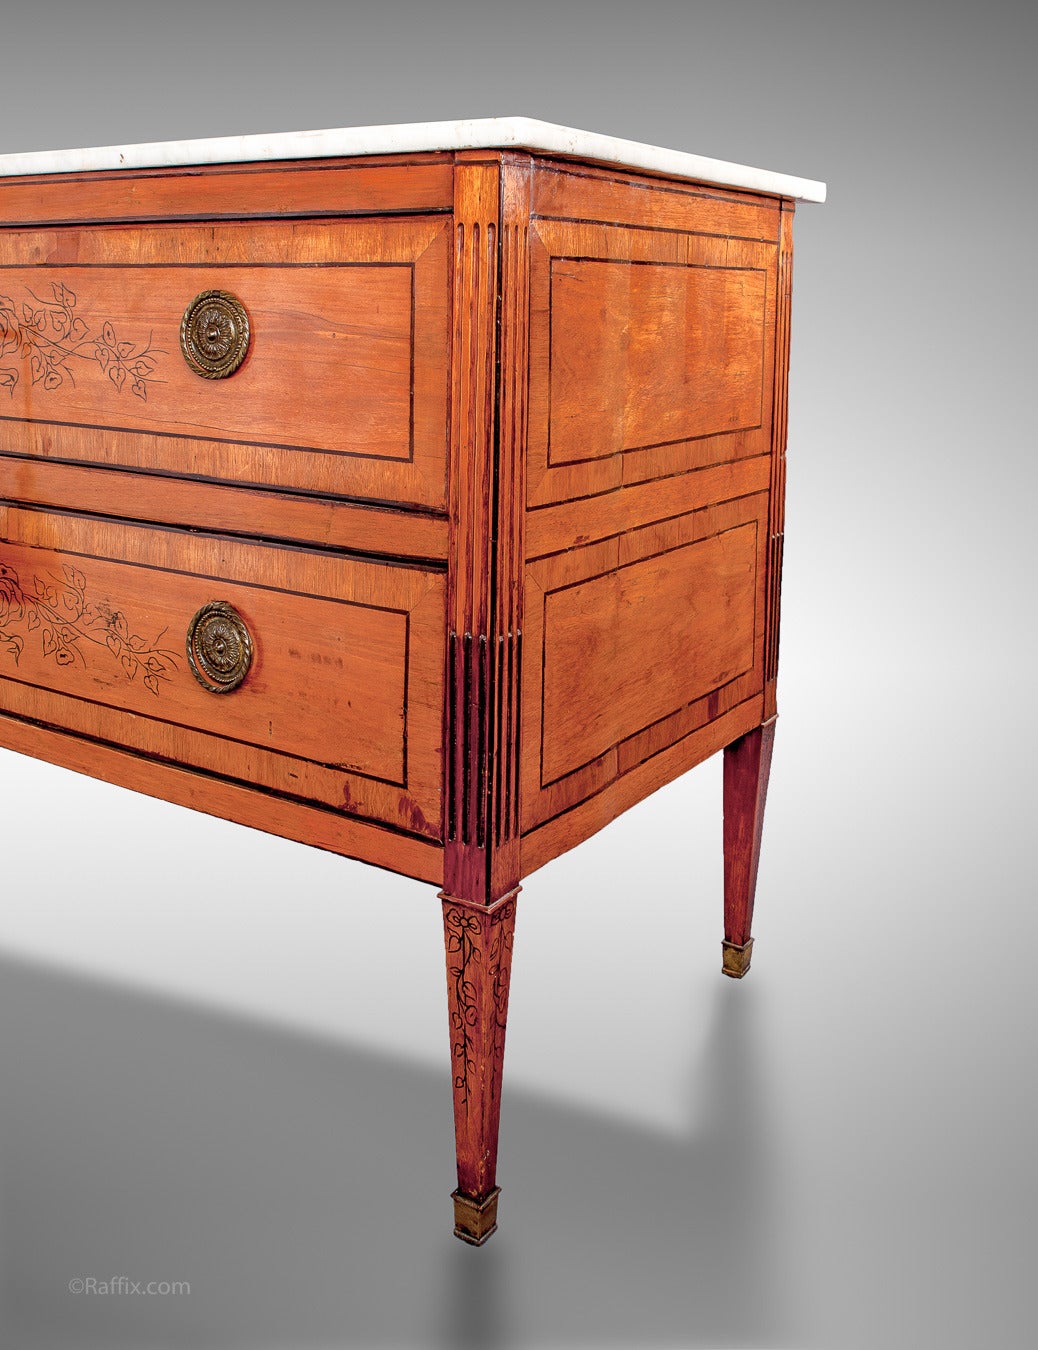 Elegant pair of 18th century Louis XVI period fruitwood commodes. Each two-drawer commode is raised by tapered legs. Above are two drawers with oval ormolu pulls and flower decorations. The top is marble and comes with two keys. Marble has been